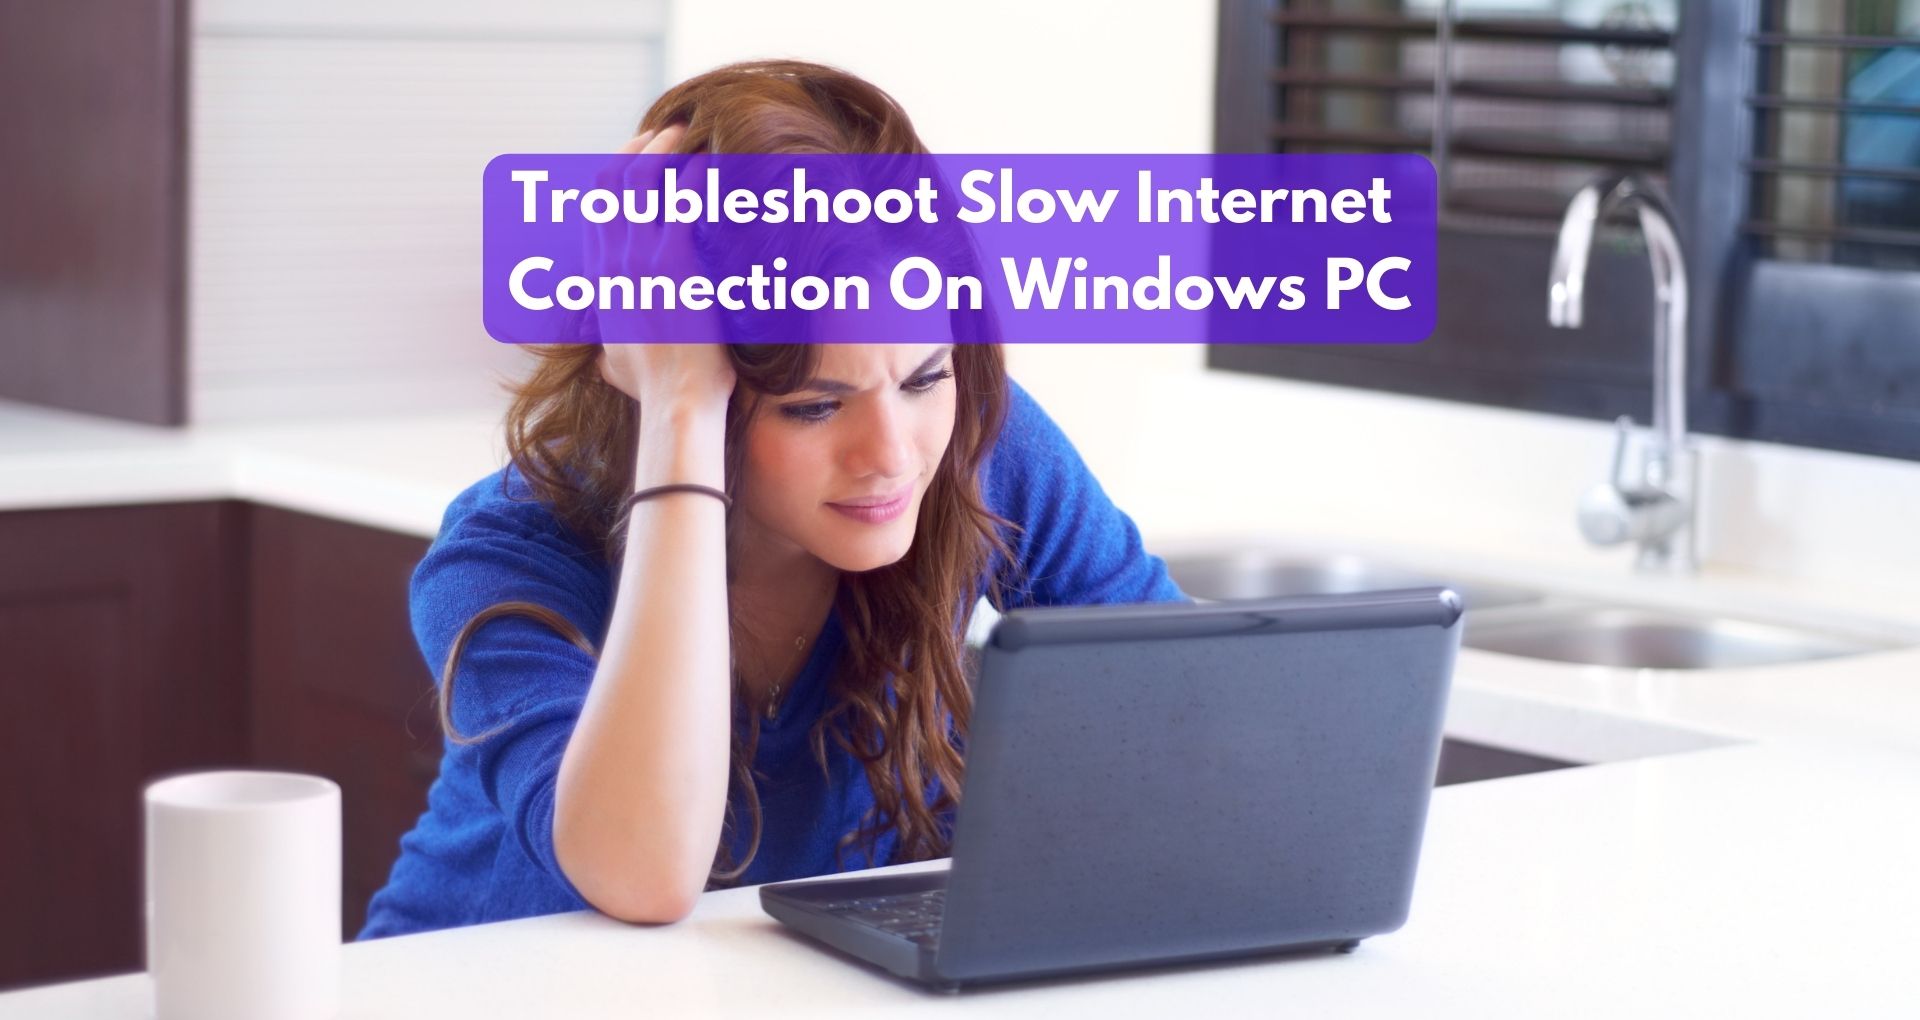 How To Troubleshoot Slow Internet Connection On Windows PC?